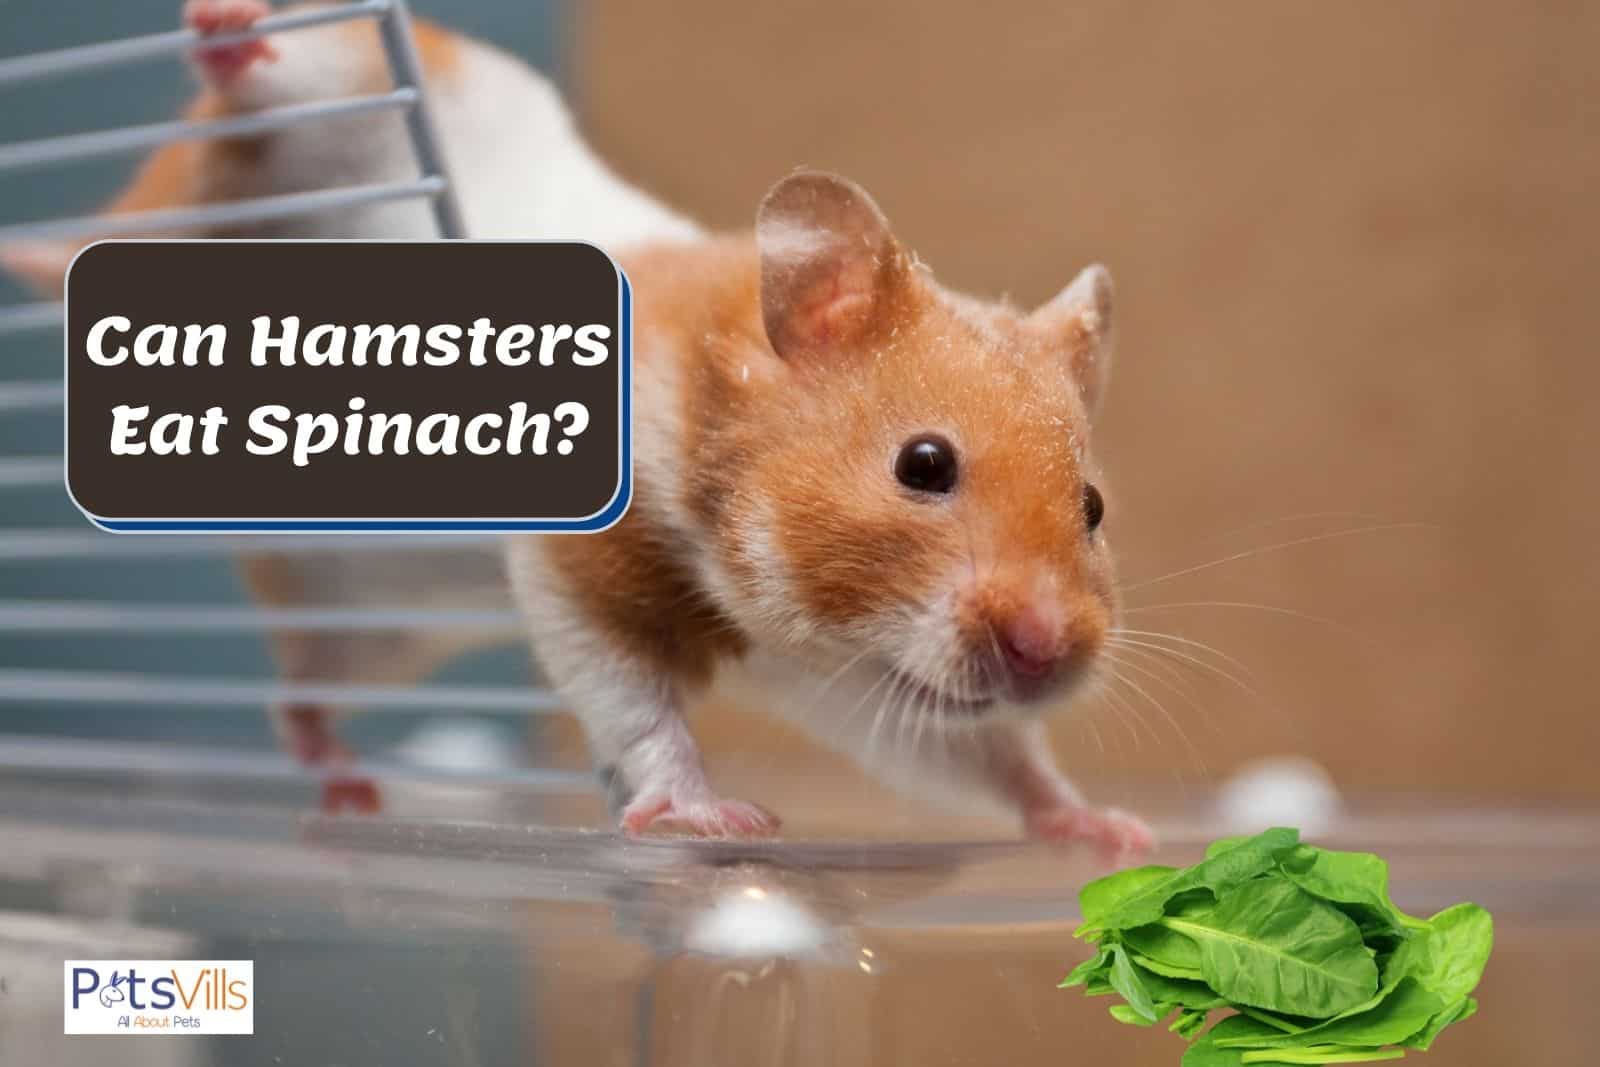 hamster eating spinach, can hamsters eating spinach